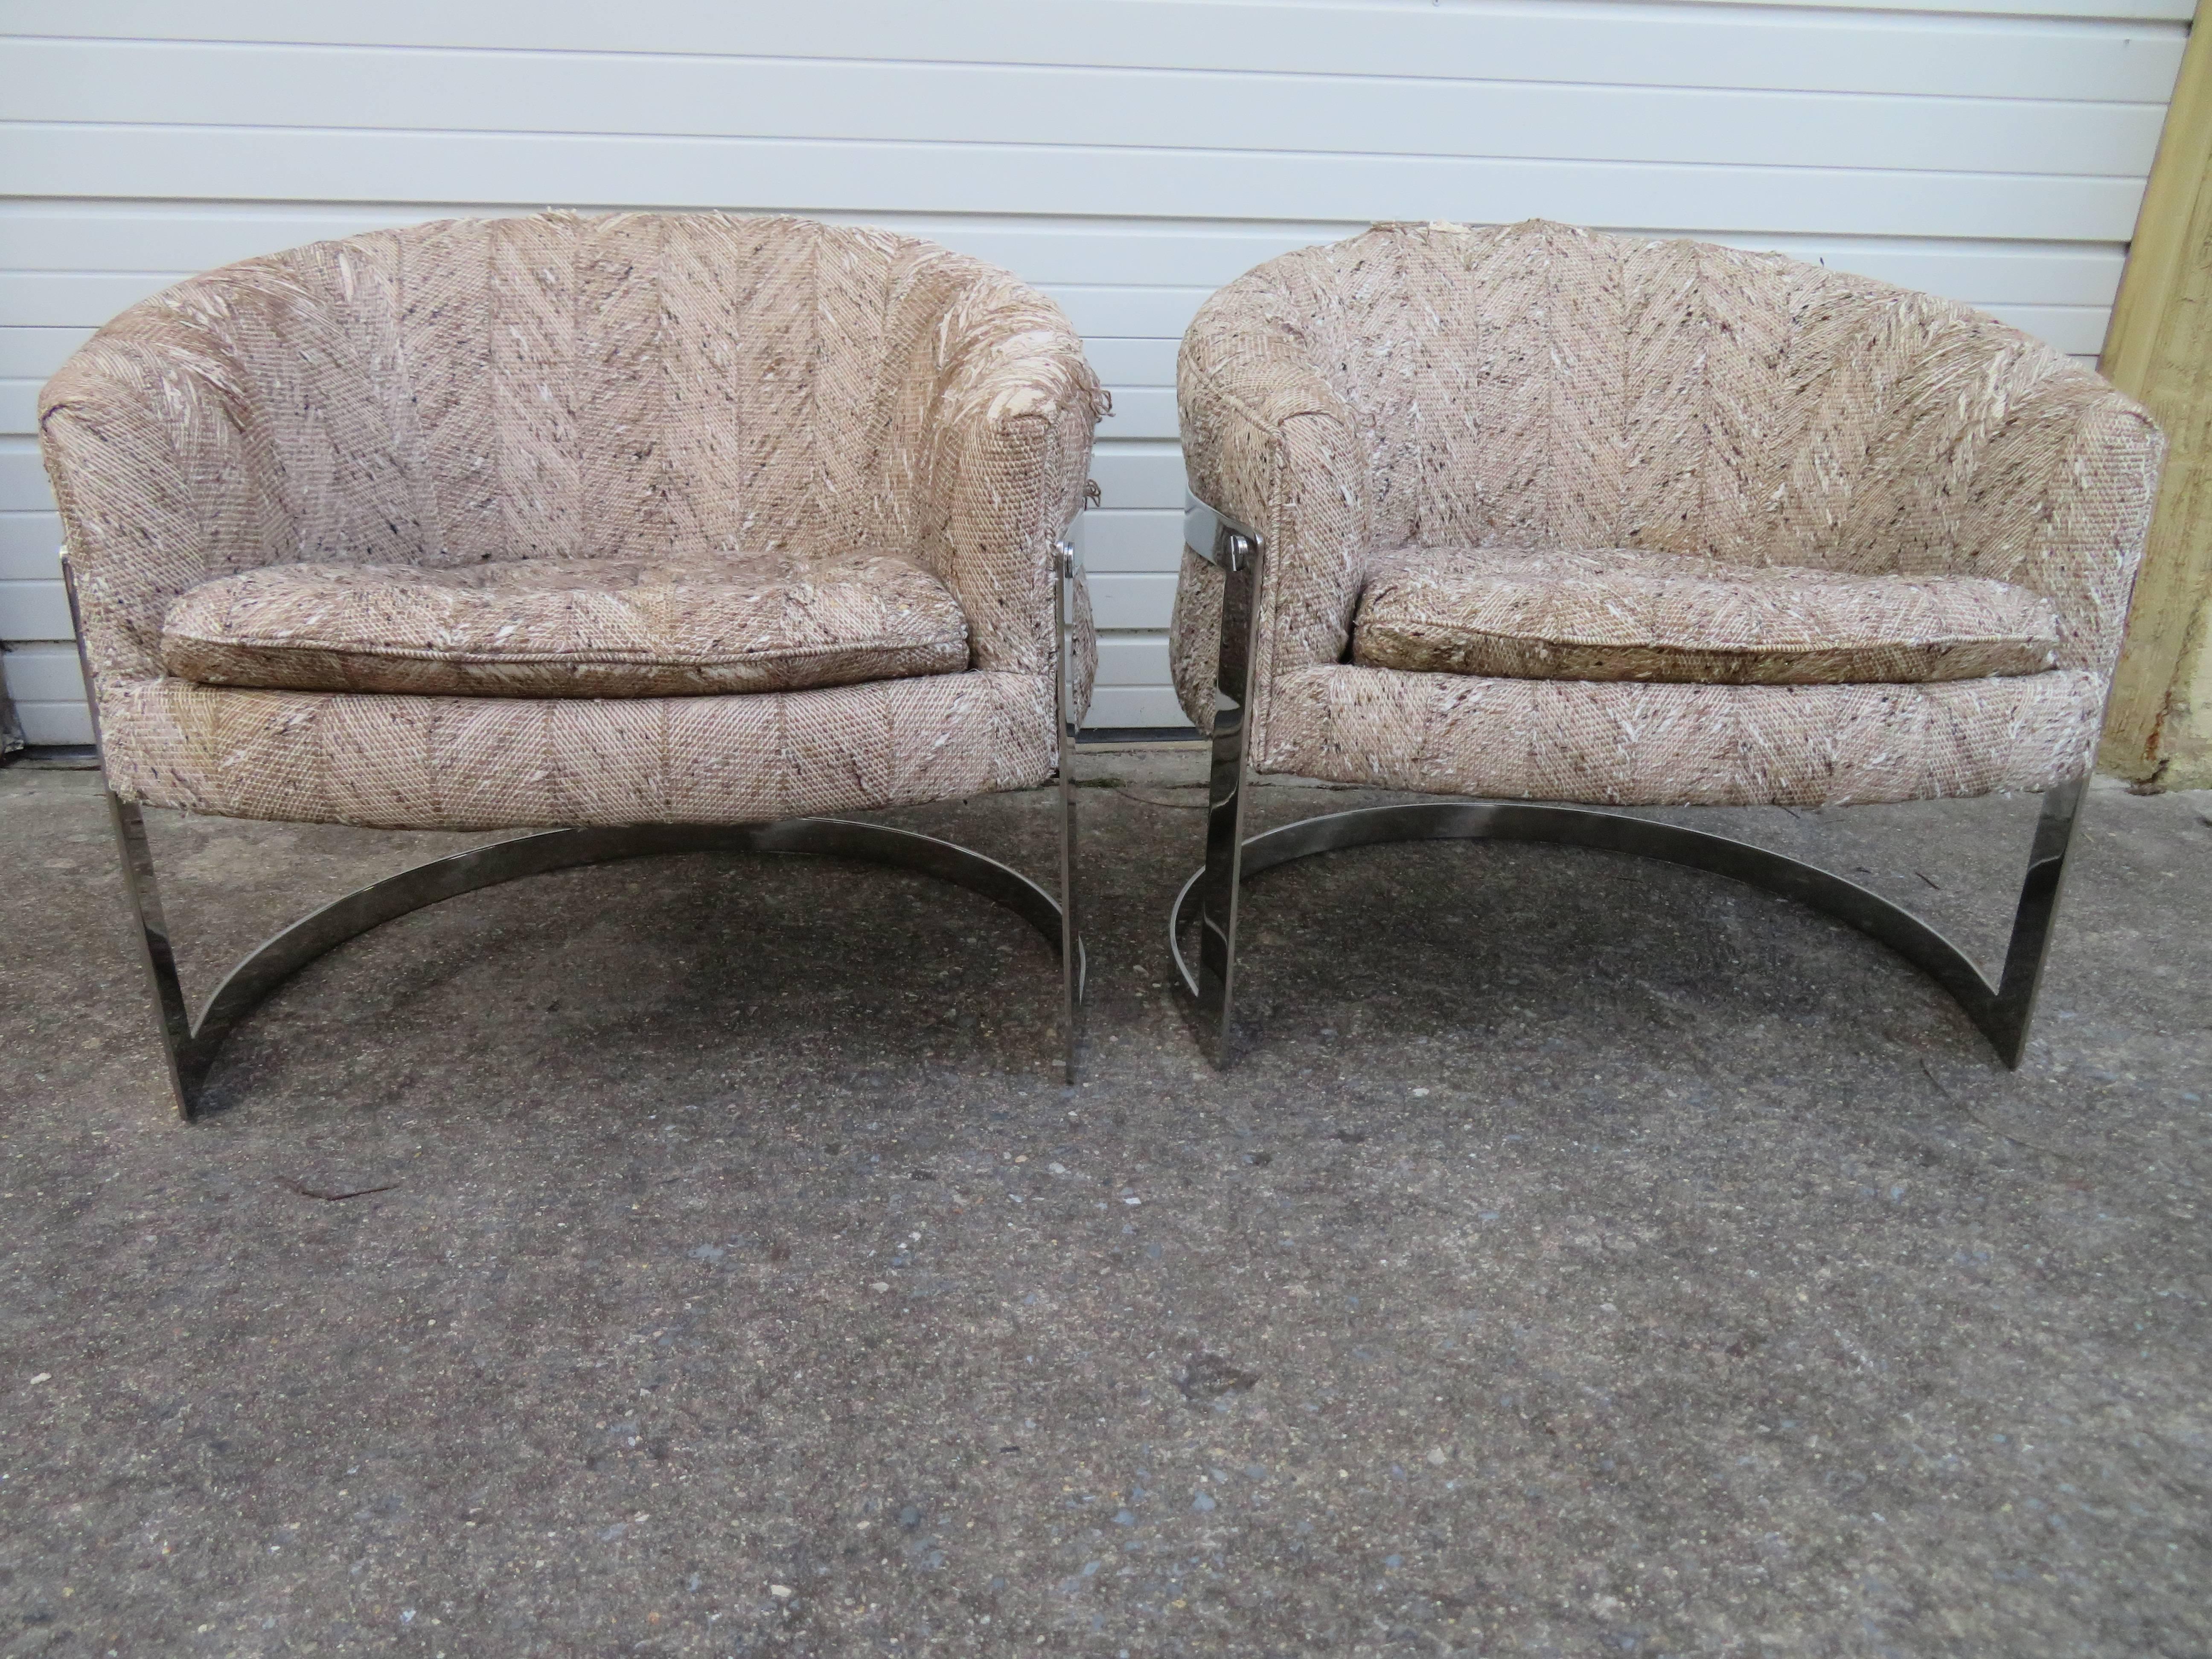 American Pair of Barrel Back Chrome Lounge Chairs, Mid-Century Modern